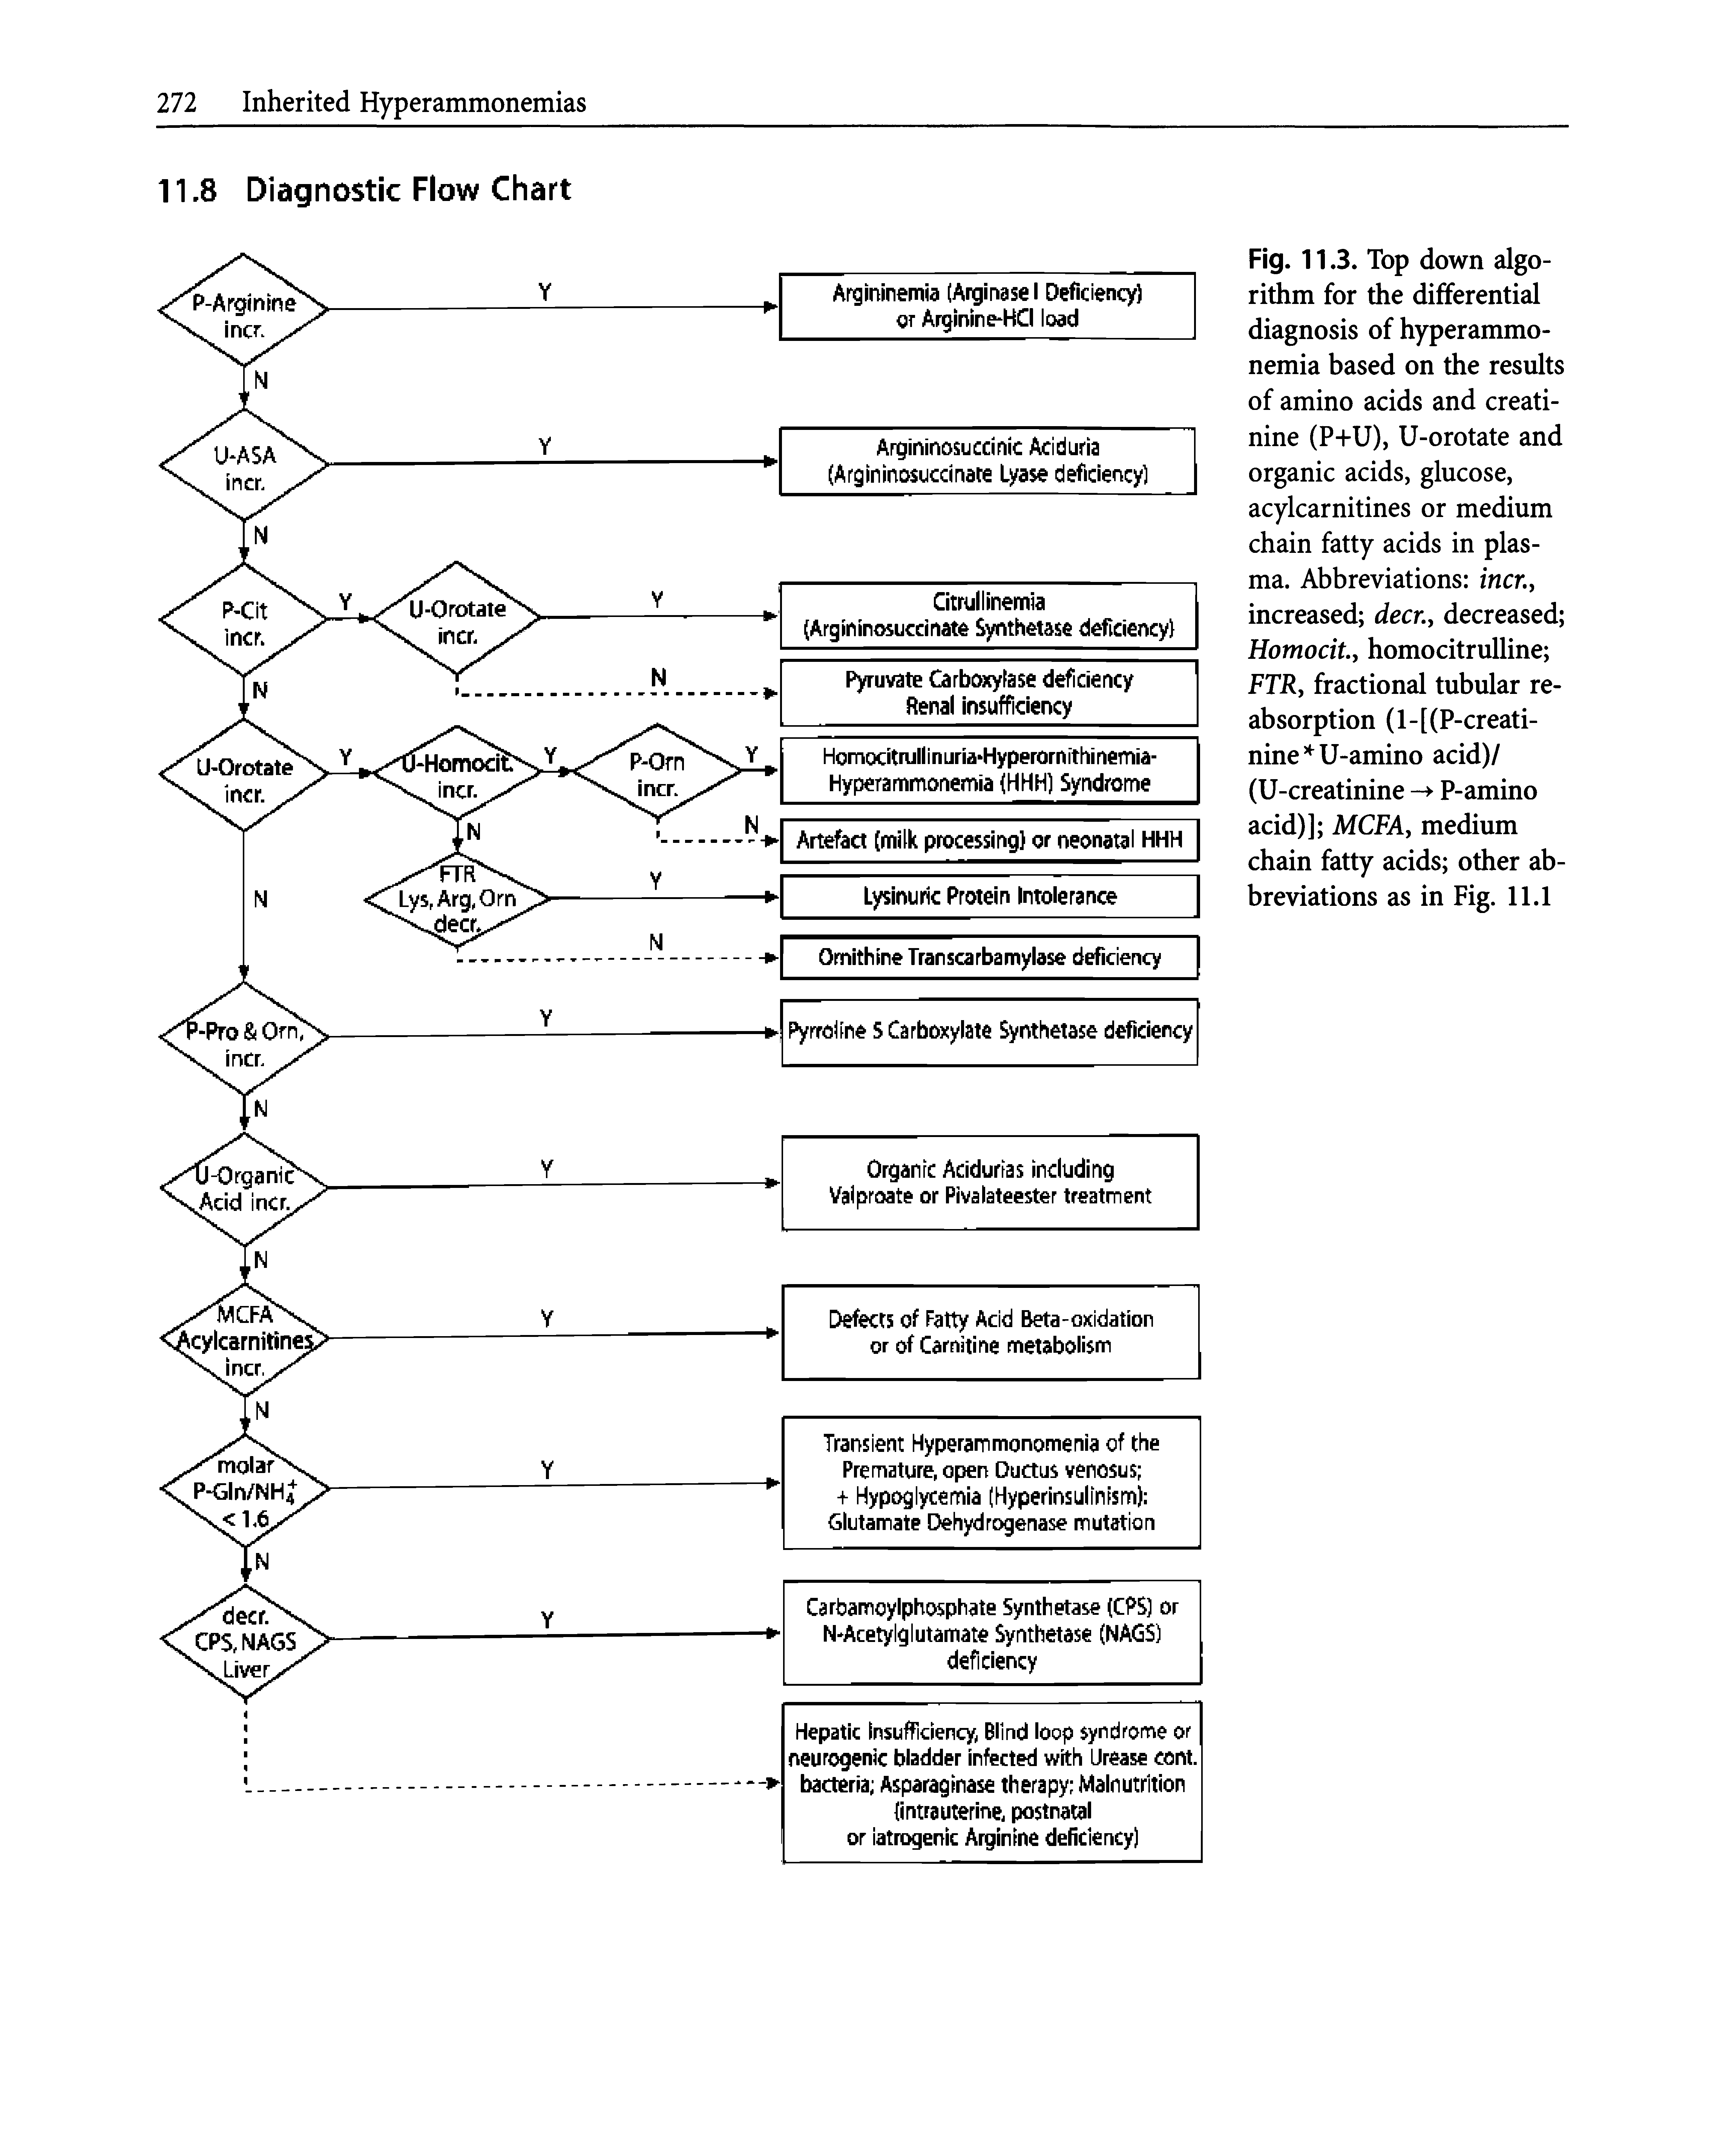 Fig. 11.3. Top down algorithm for the differential diagnosis of hyperammonemia based on the results of amino acids and creatinine (P+U), U-orotate and organic acids, glucose, acylcarnitines or medium chain fatty acids in plasma. Abbreviations men, increased deer., decreased Homocity homocitruUine FTRy fractional tubular reabsorption (l-[(P-creati-nine U-amino acid)/ (U-creatinine -> P-amino acid)] MCFAy medium chain fatty acids other abbreviations as in Fig. 11.1...